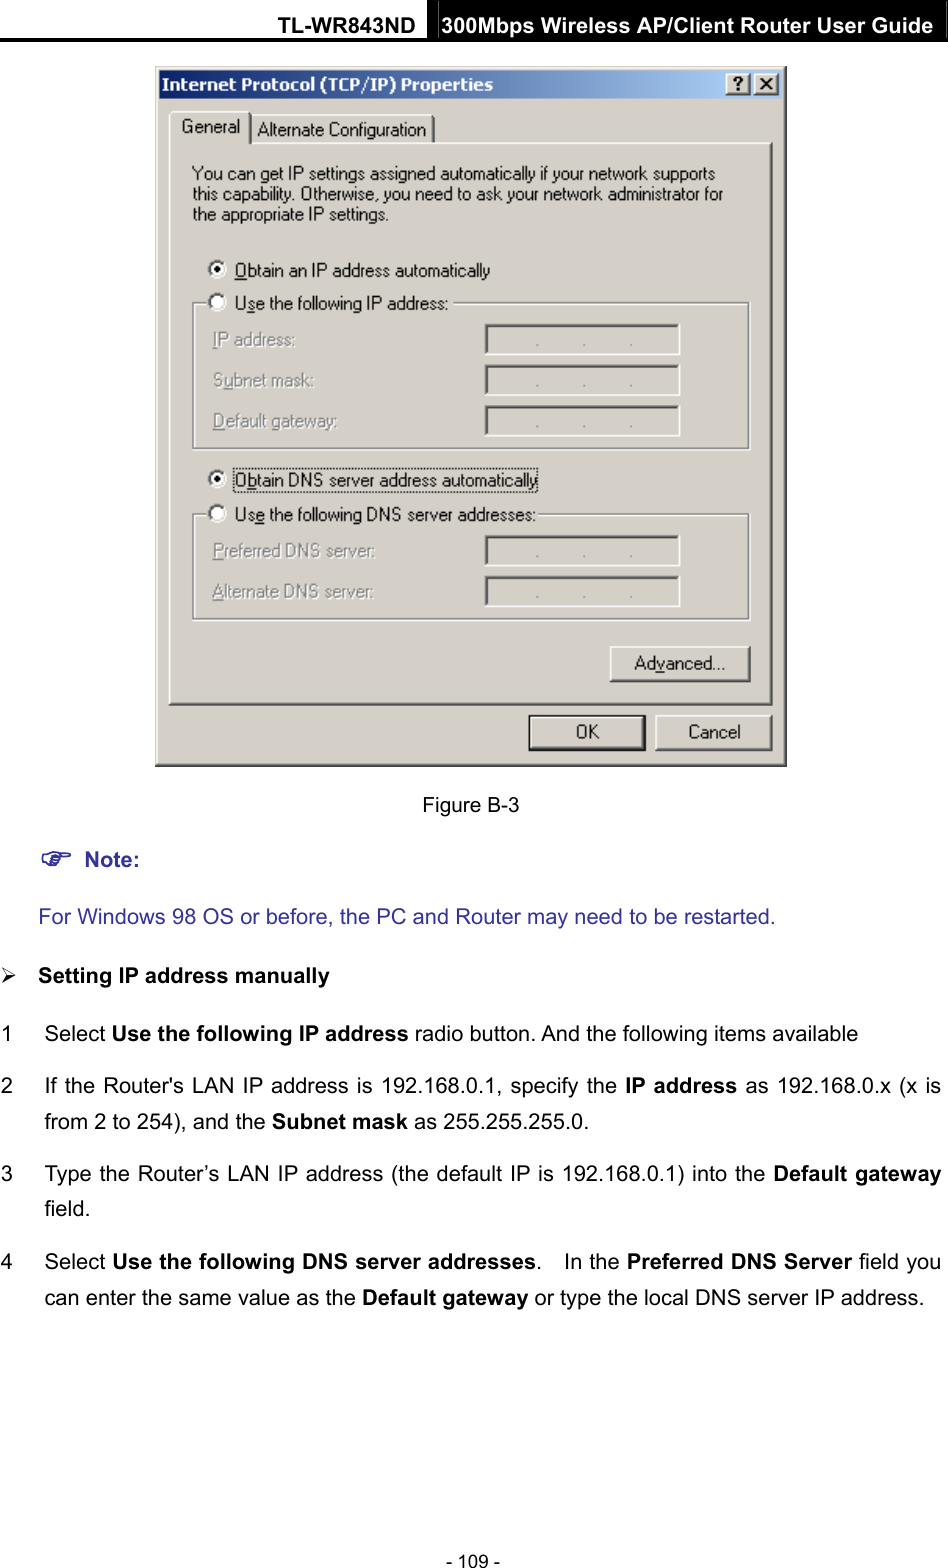 TL-WR843ND 300Mbps Wireless AP/Client Router User Guide - 109 -  Figure B-3  Note:  For Windows 98 OS or before, the PC and Router may need to be restarted.  Setting IP address manually 1 Select Use the following IP address radio button. And the following items available 2  If the Router&apos;s LAN IP address is 192.168.0.1, specify the IP address as 192.168.0.x (x is from 2 to 254), and the Subnet mask as 255.255.255.0. 3  Type the Router’s LAN IP address (the default IP is 192.168.0.1) into the Default gateway field. 4 Select Use the following DNS server addresses.  In the Preferred DNS Server field you can enter the same value as the Default gateway or type the local DNS server IP address. 